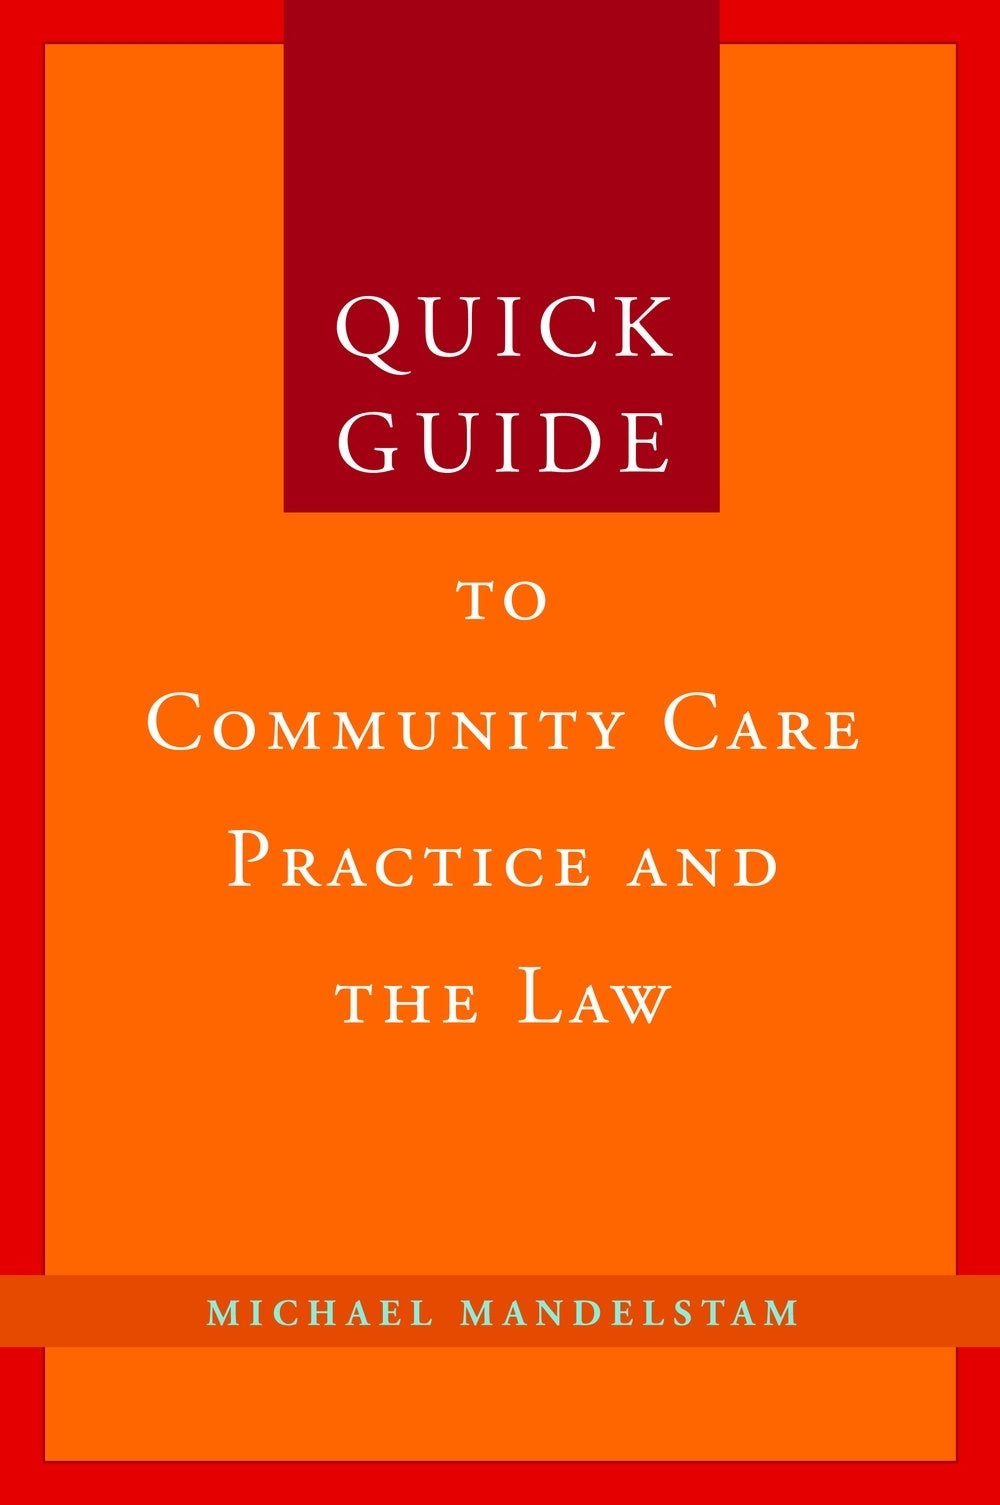 Quick Guide to Community Care Practice and the Law by Michael Mandelstam